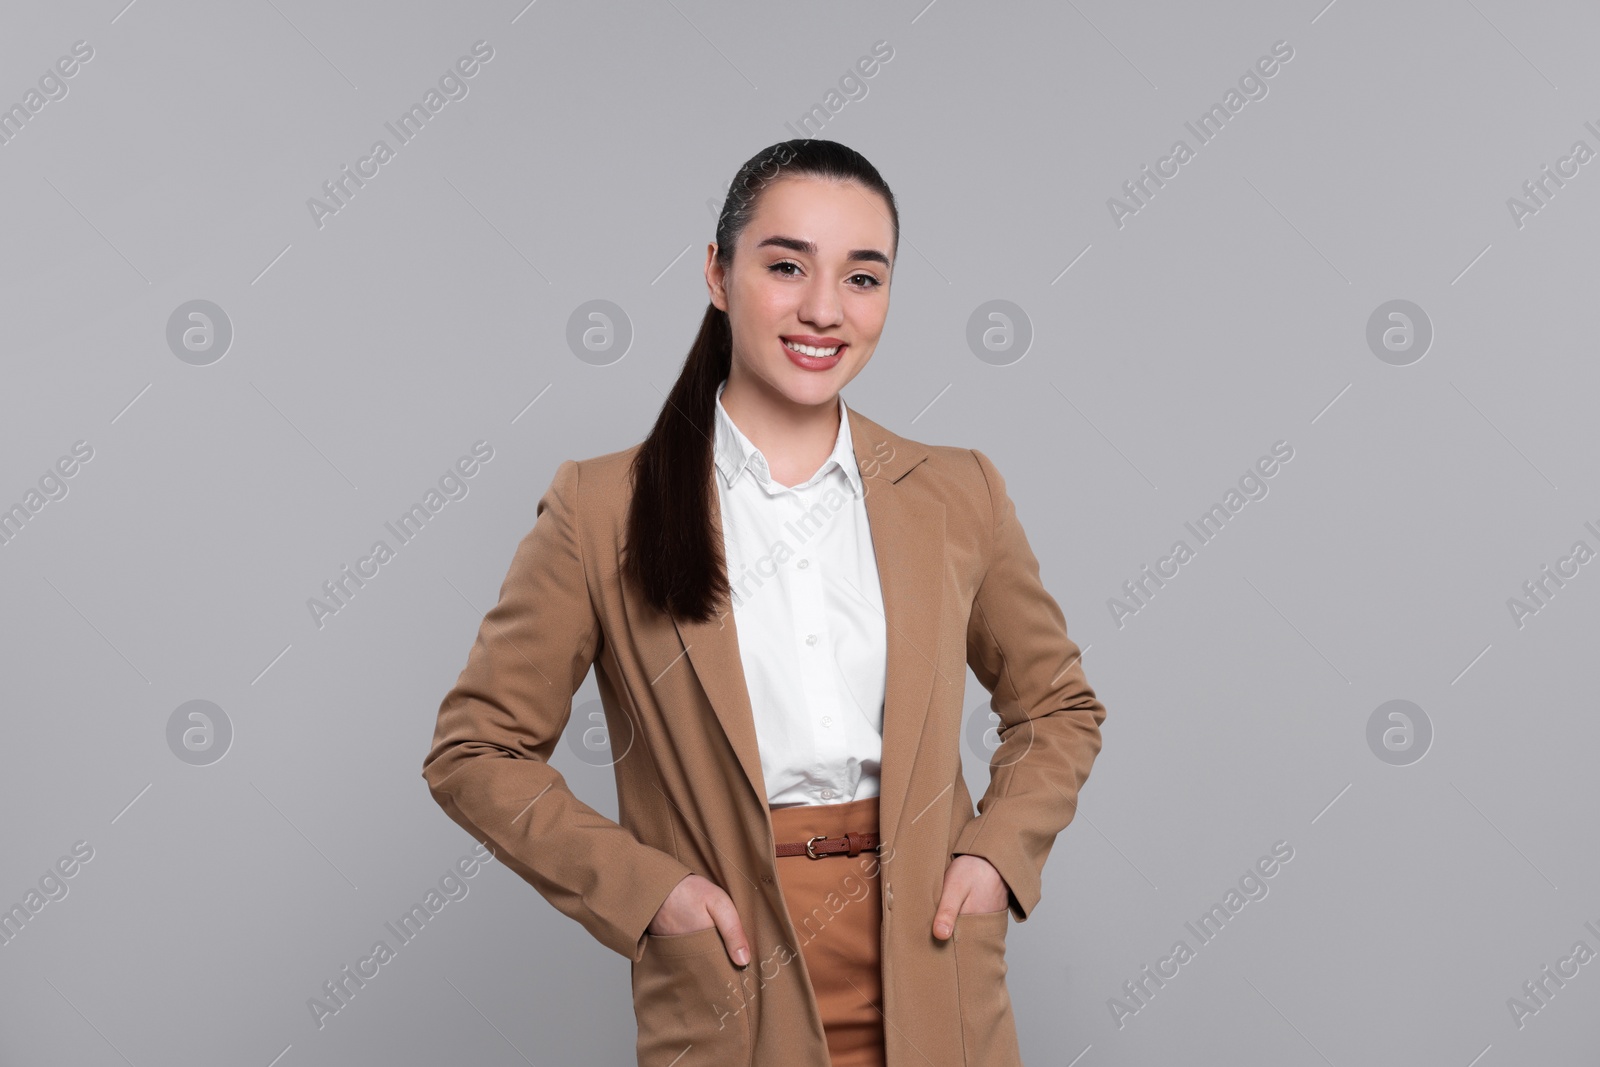 Photo of Happy real estate agent on grey background